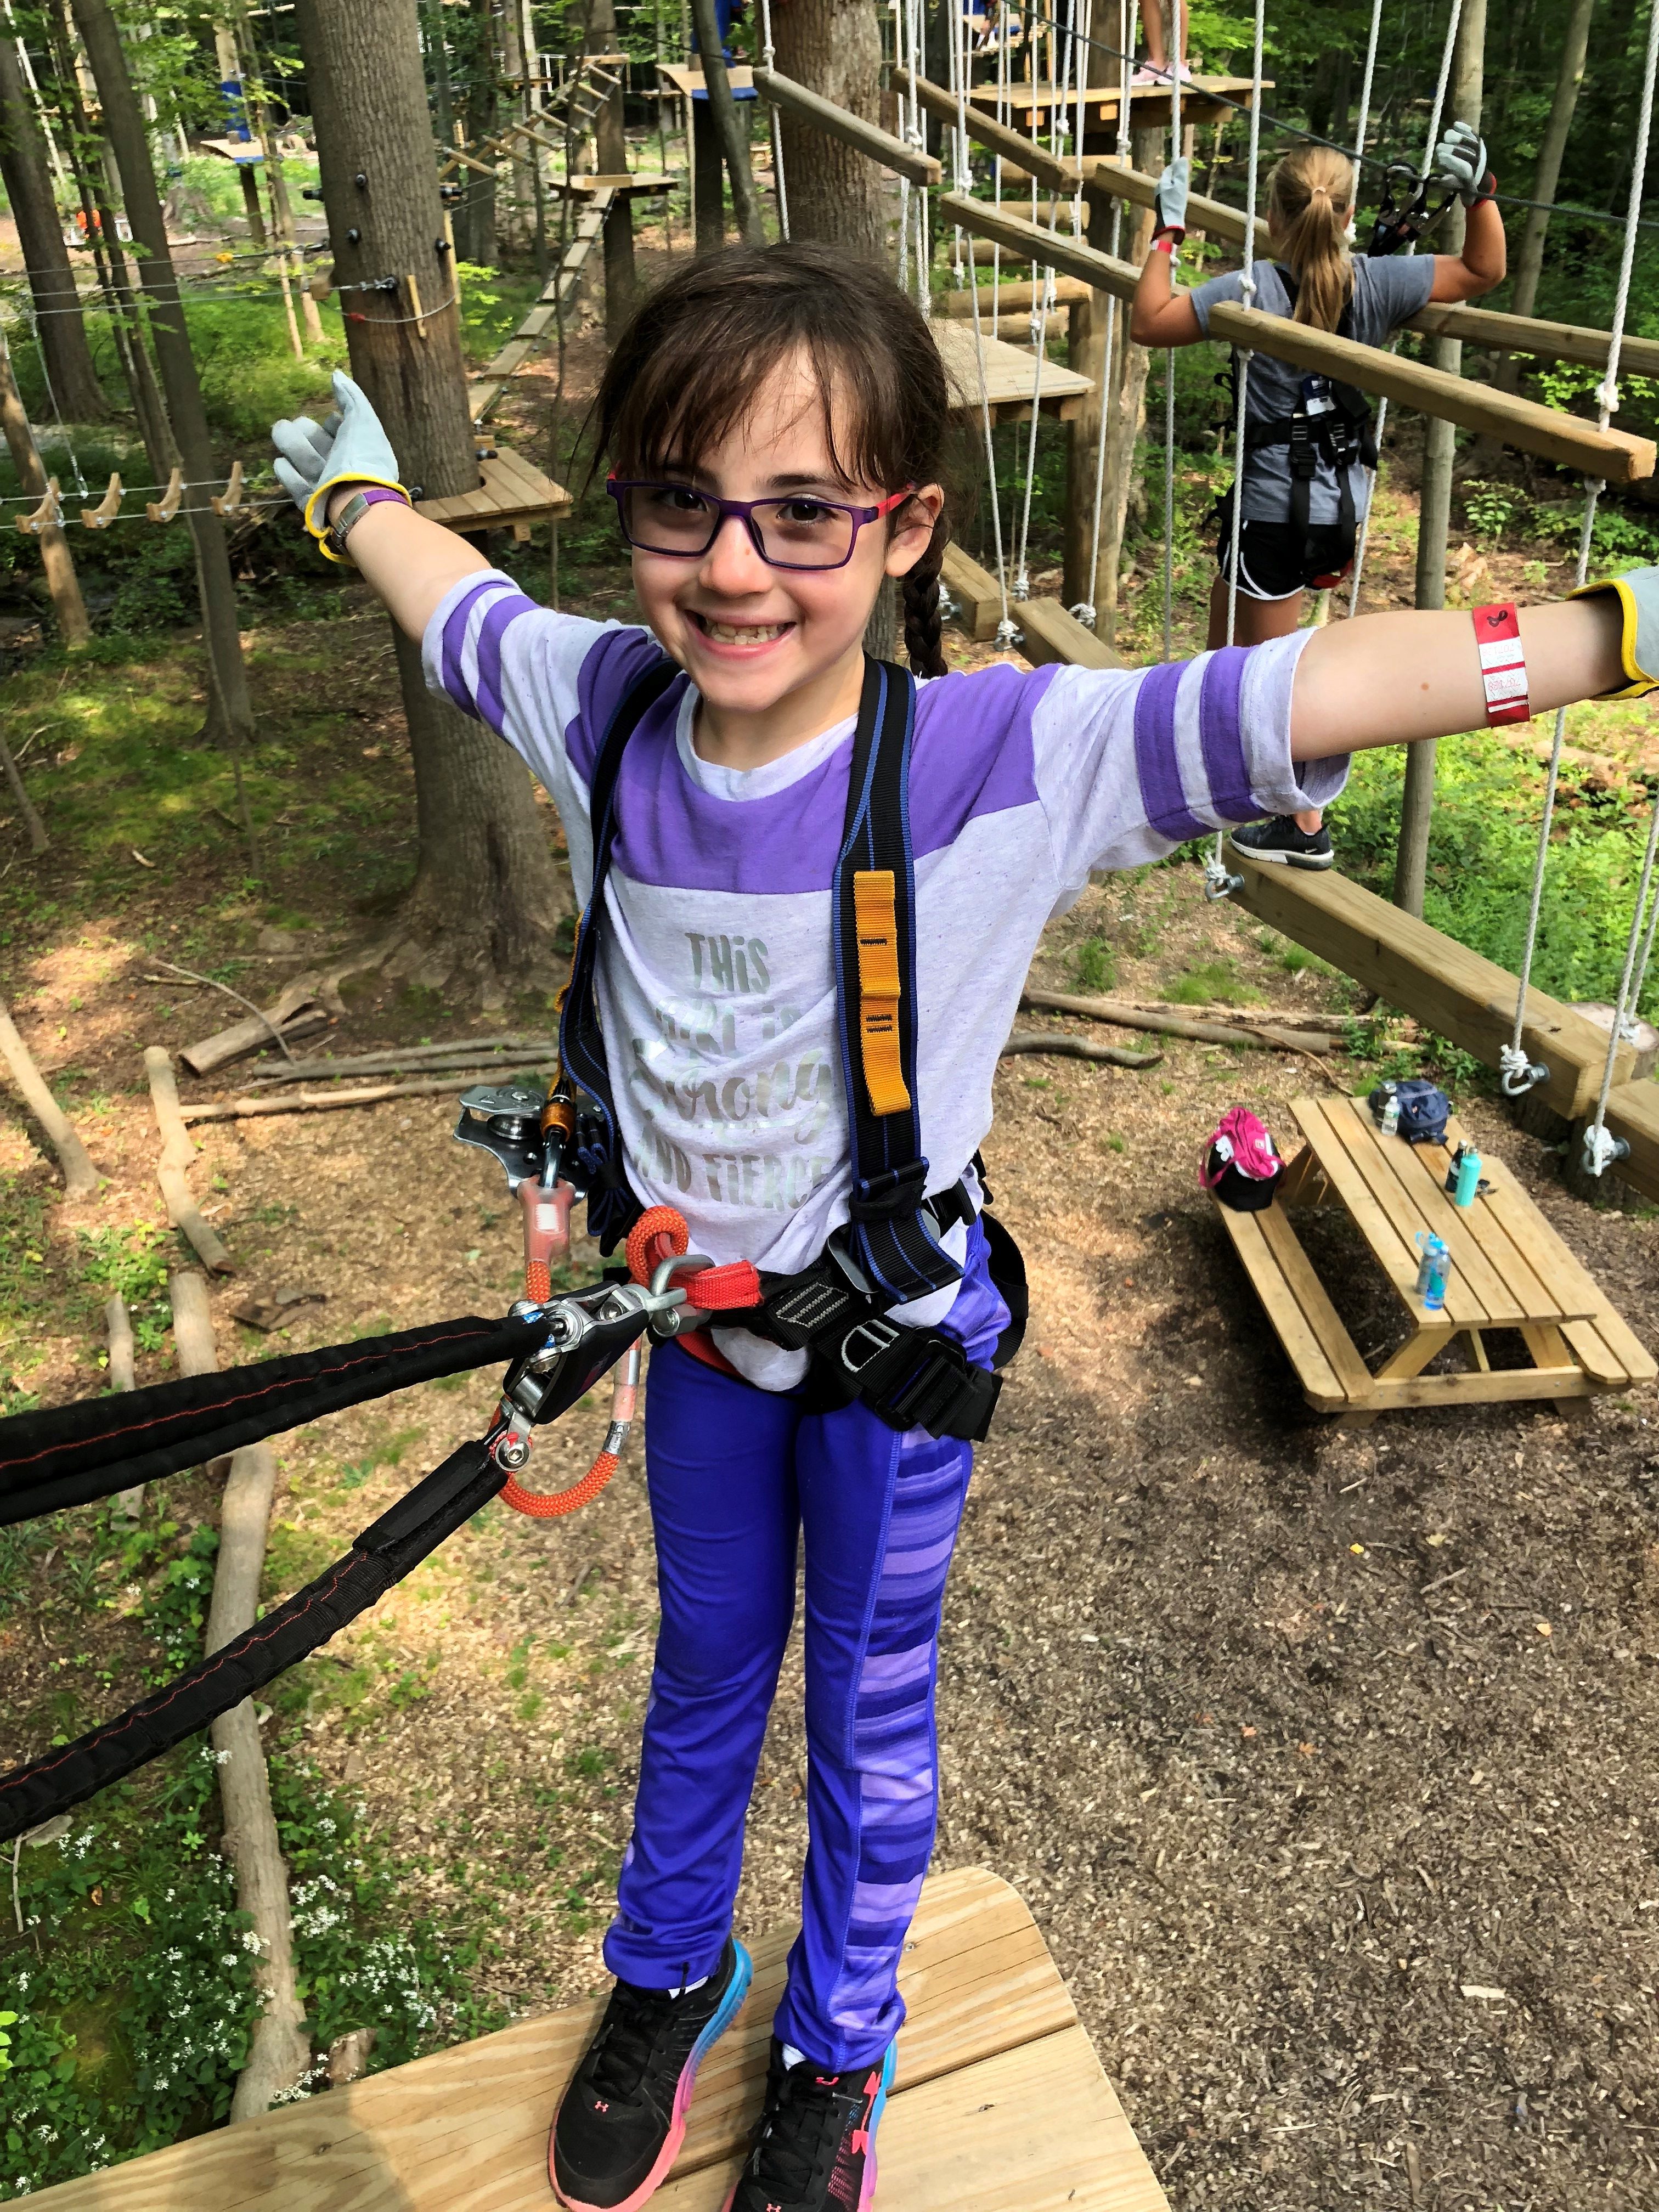 8 year old loves the zip line